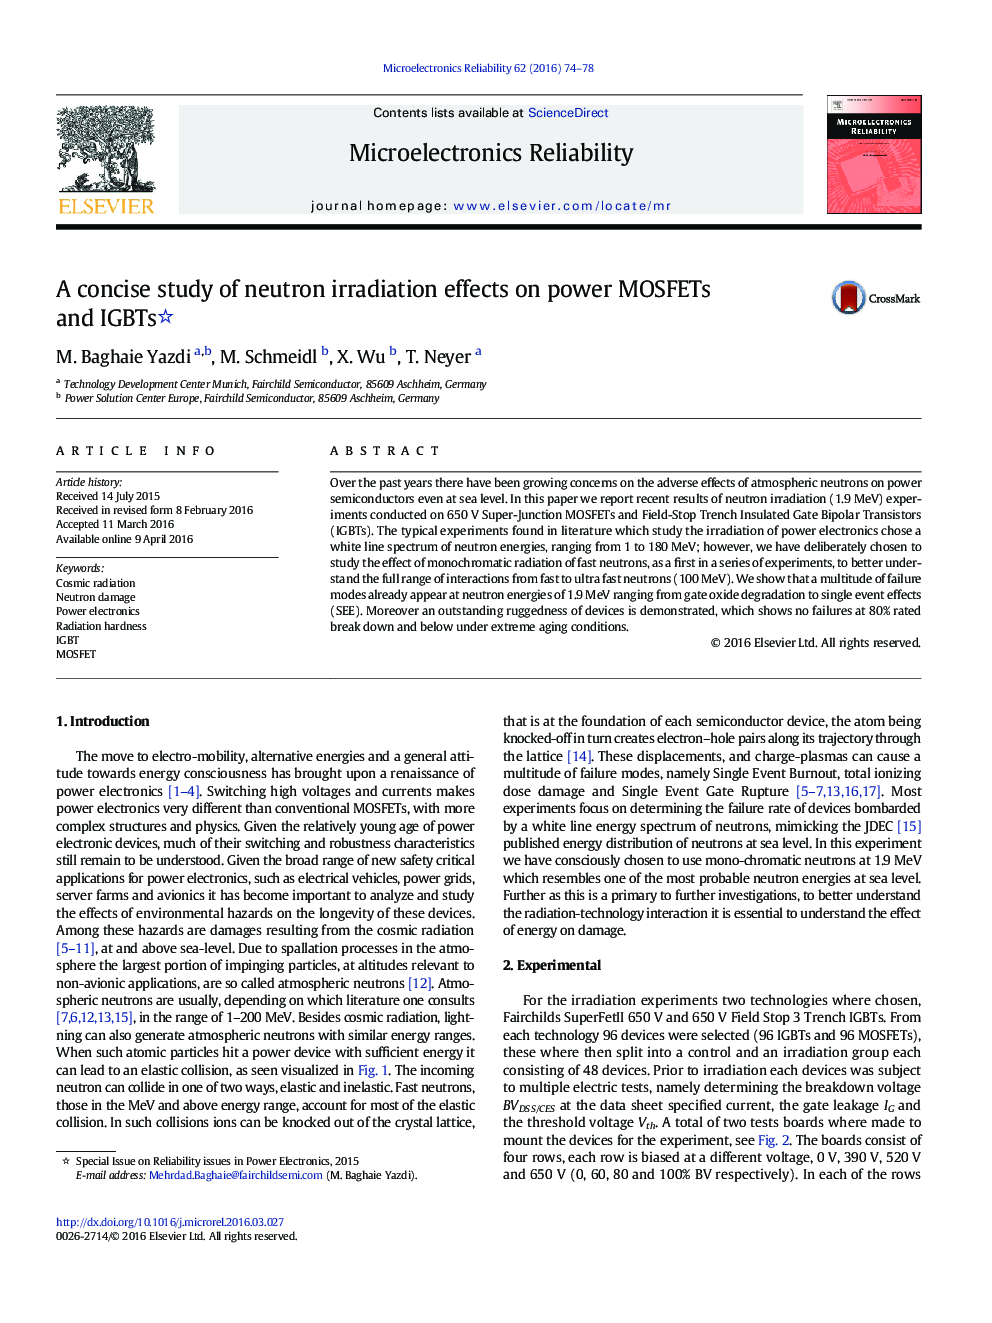 A concise study of neutron irradiation effects on power MOSFETs and IGBTs 